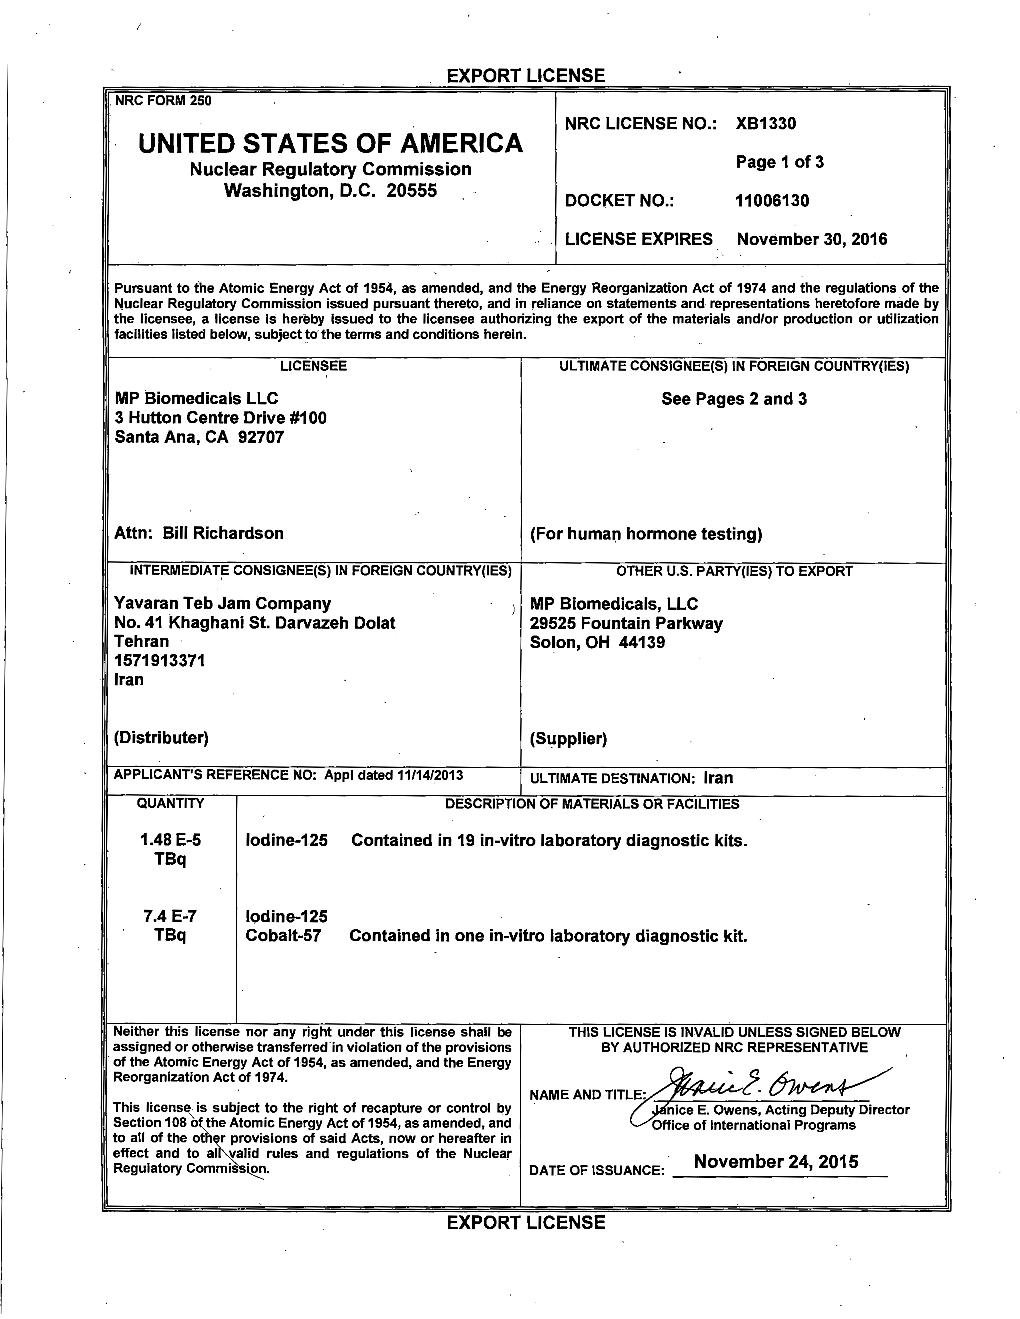 Export License Issued to MP Biomedicals LLC, XB1330, Dated November 24, 2015